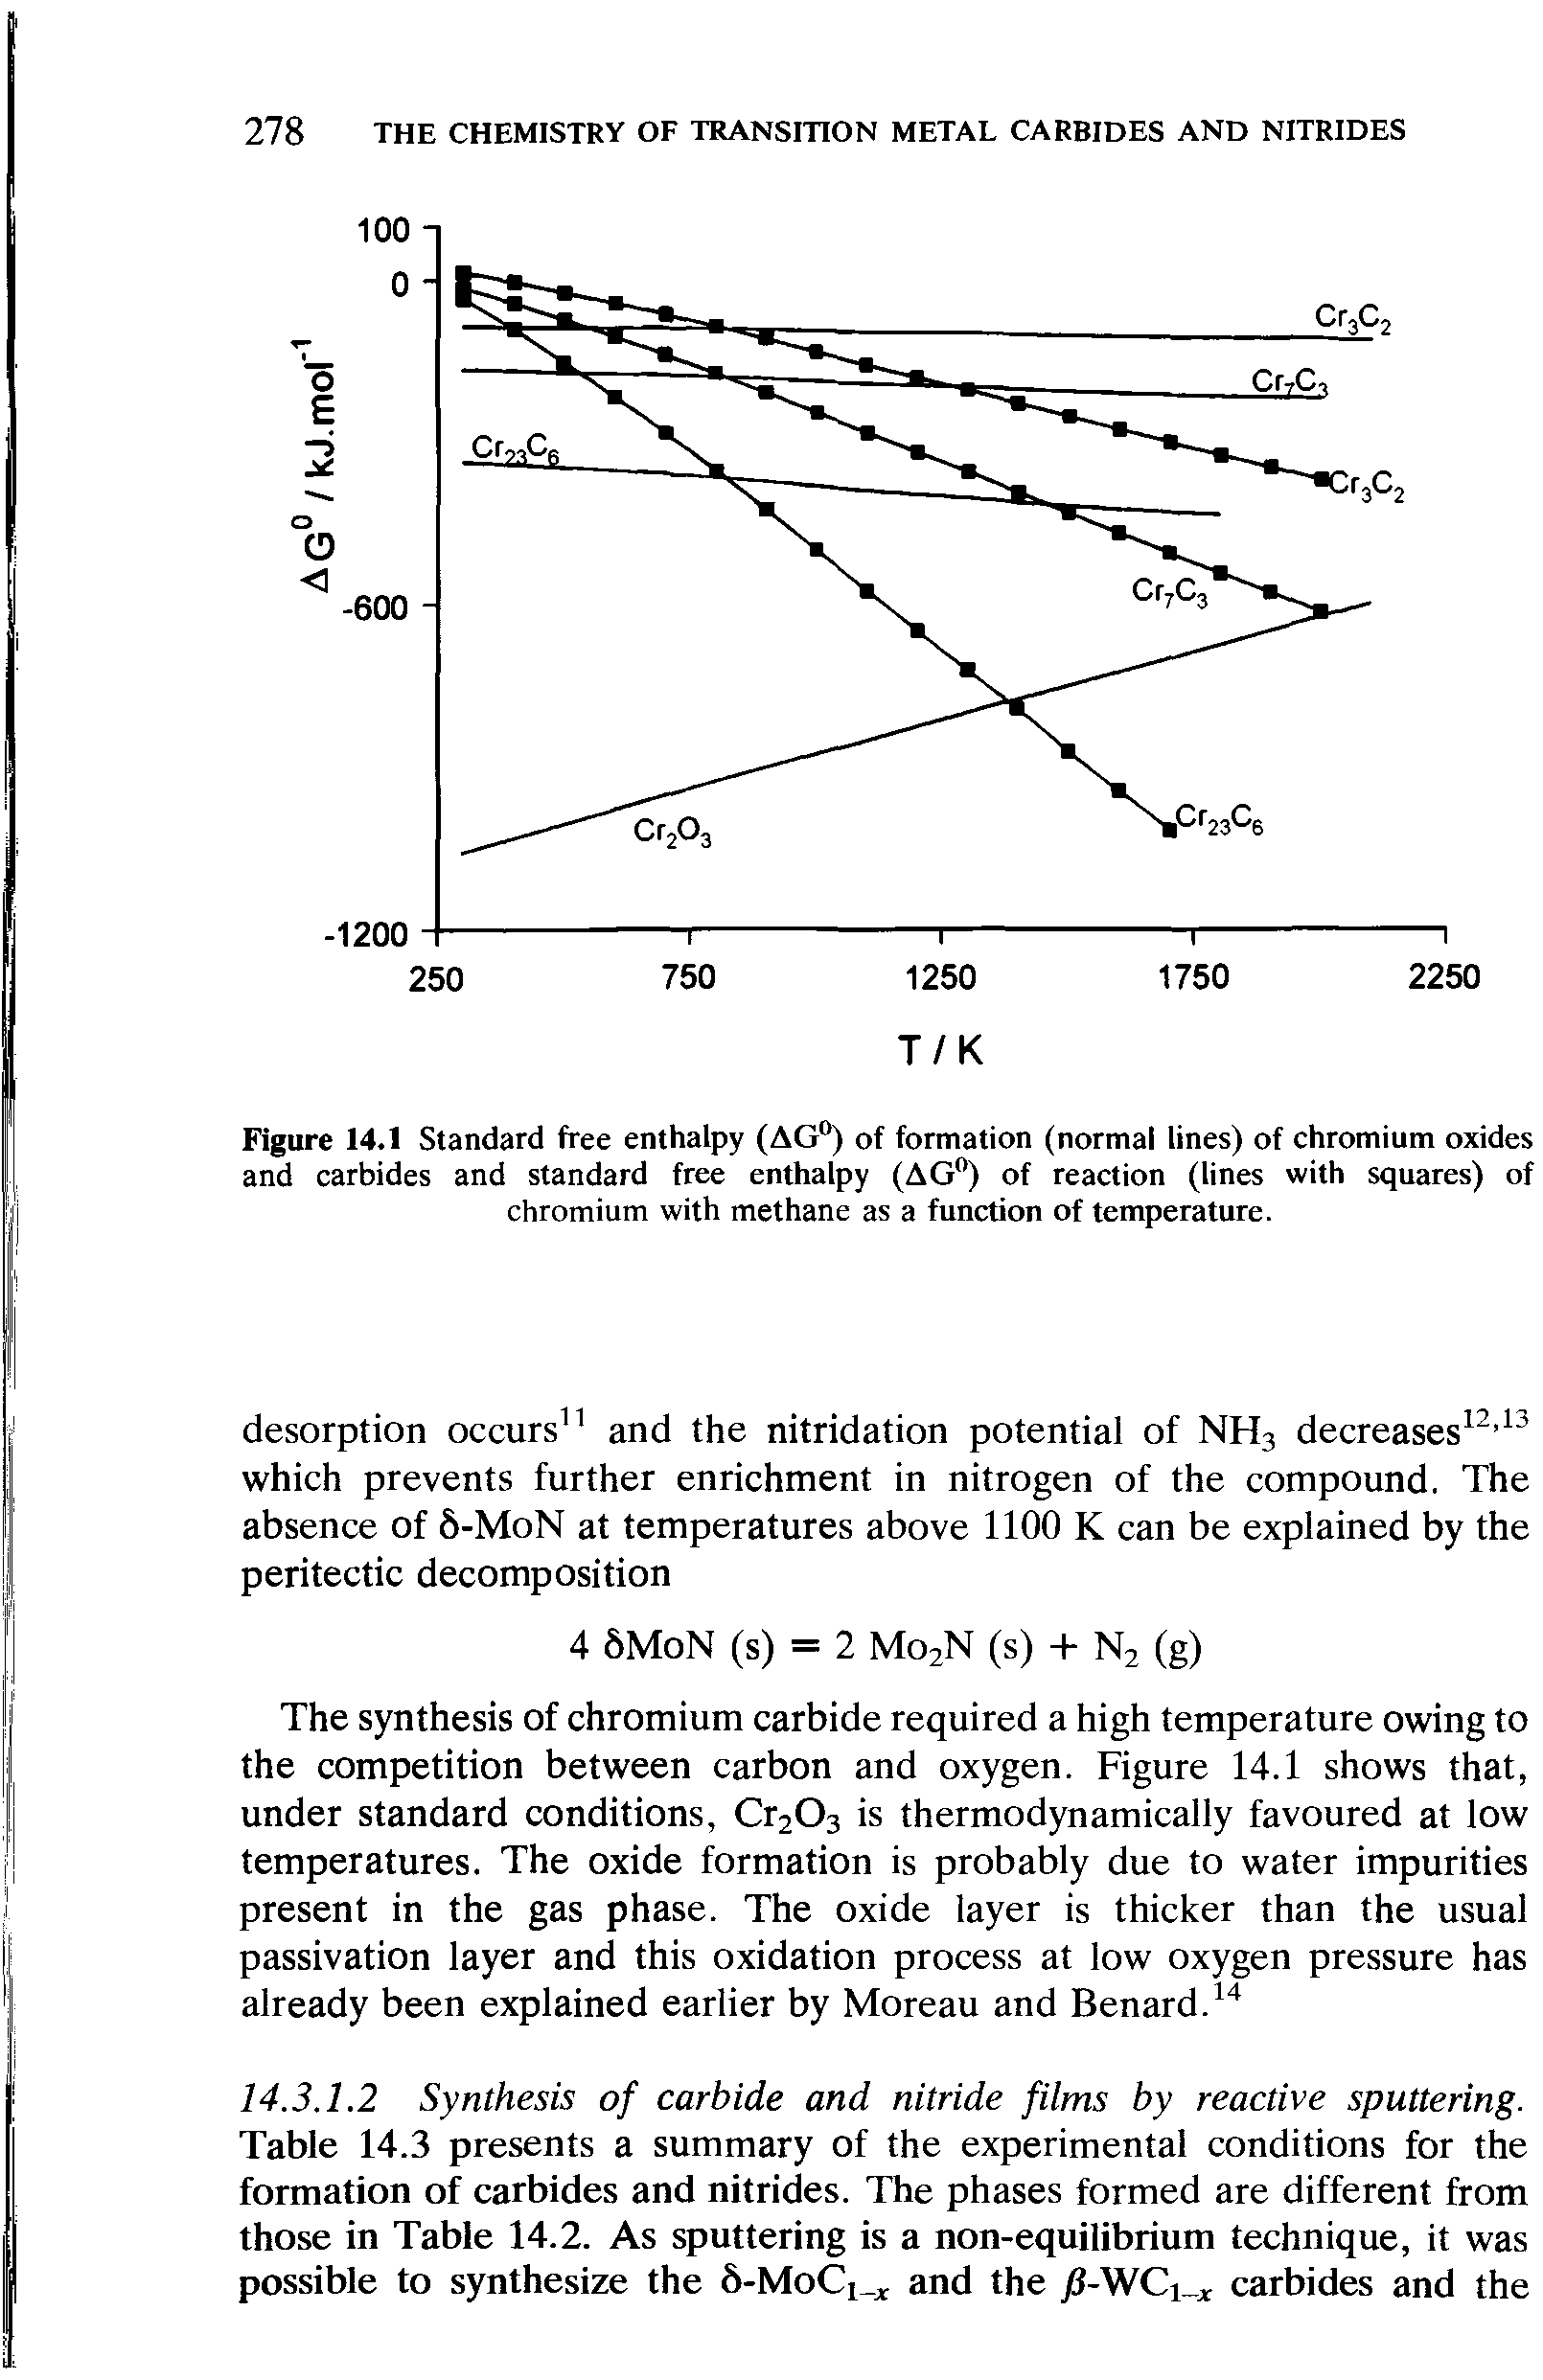 Figure 14.1 Standard free enthalpy (AG°) of formation (normal lines) of chromium oxides and carbides and standard free enthalpy (AG°) of reaction (lines with squares) of chromium with methane as a function of temperature.